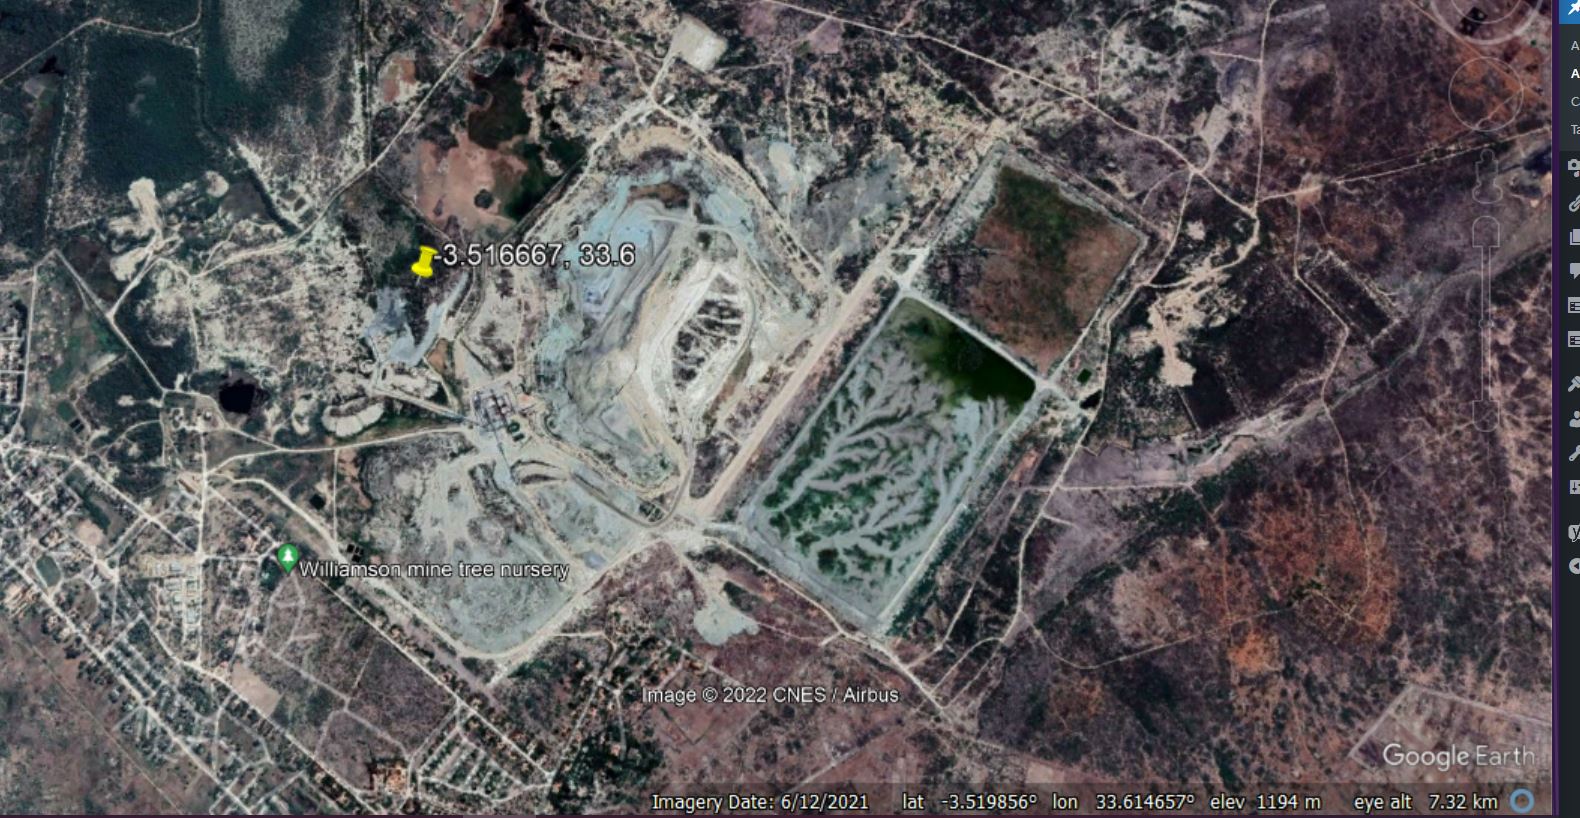 Google Earth image of the Williamson Mine in Tanzania. Note the tailings storage facility on the centre right of the image.